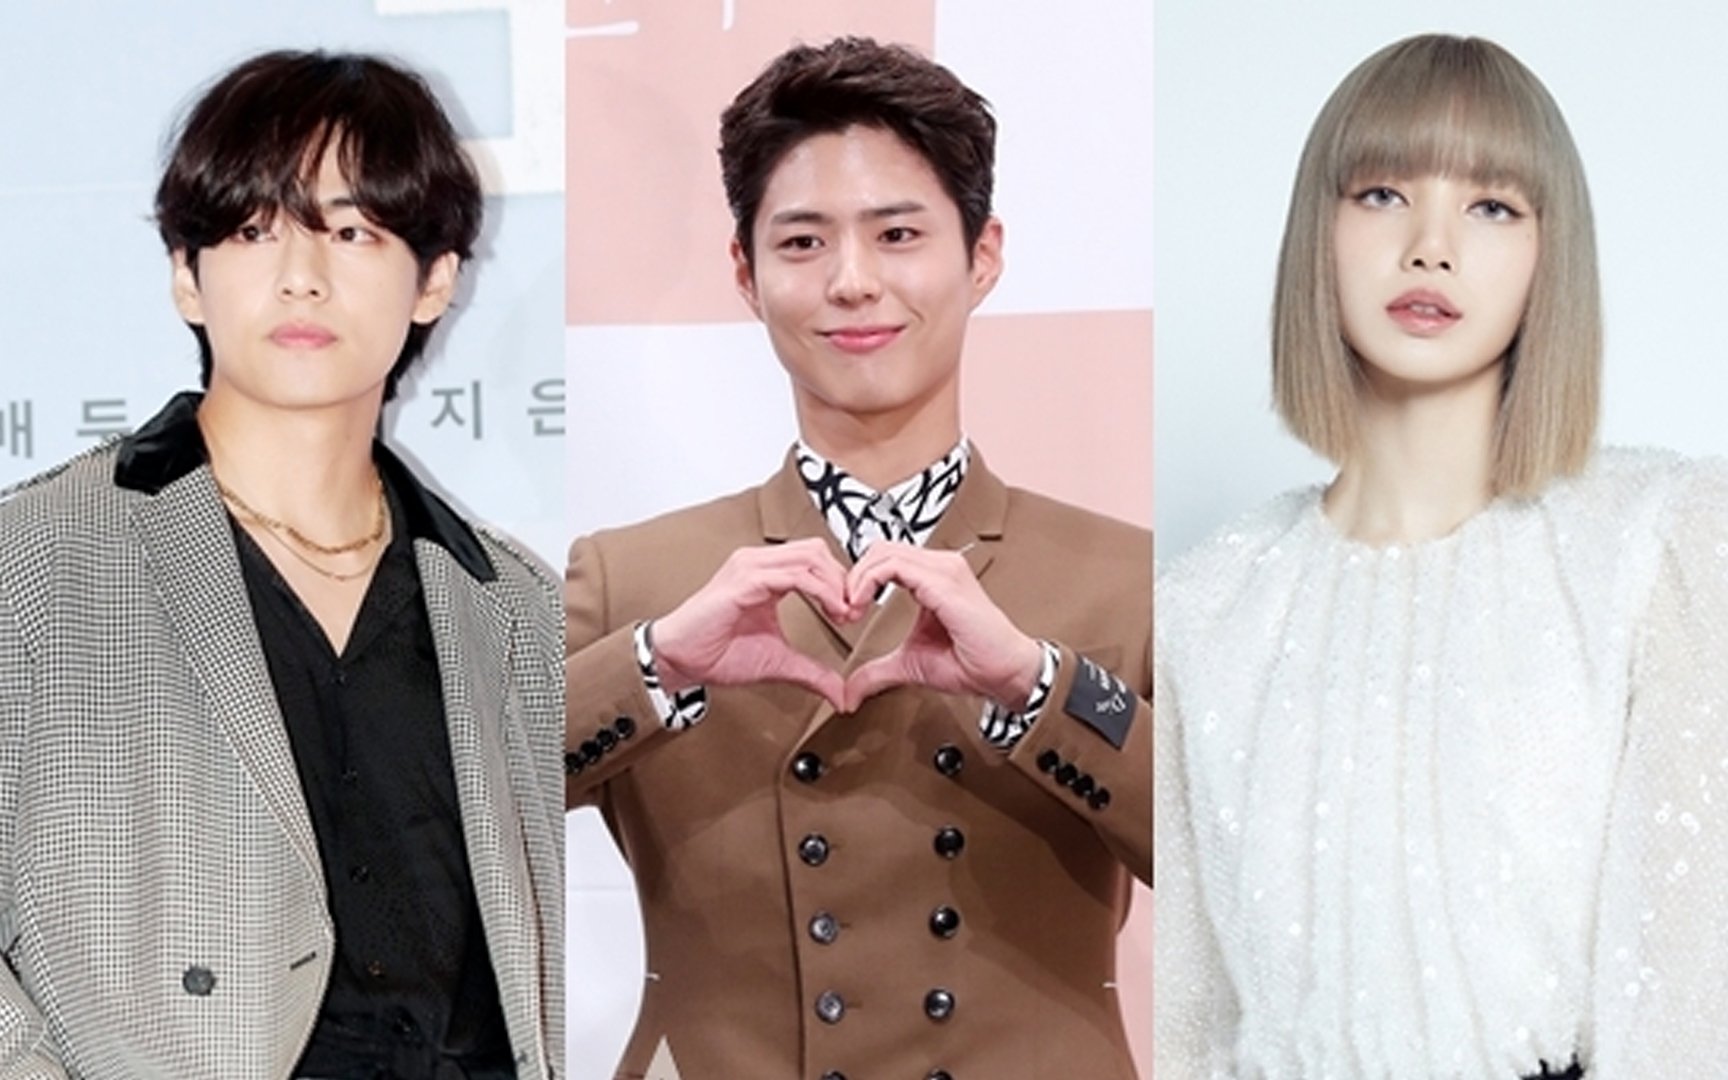 Park Bo Gum, BTS's V, and BLACKPINK's Lisa will be traveling together in a  private jet to France